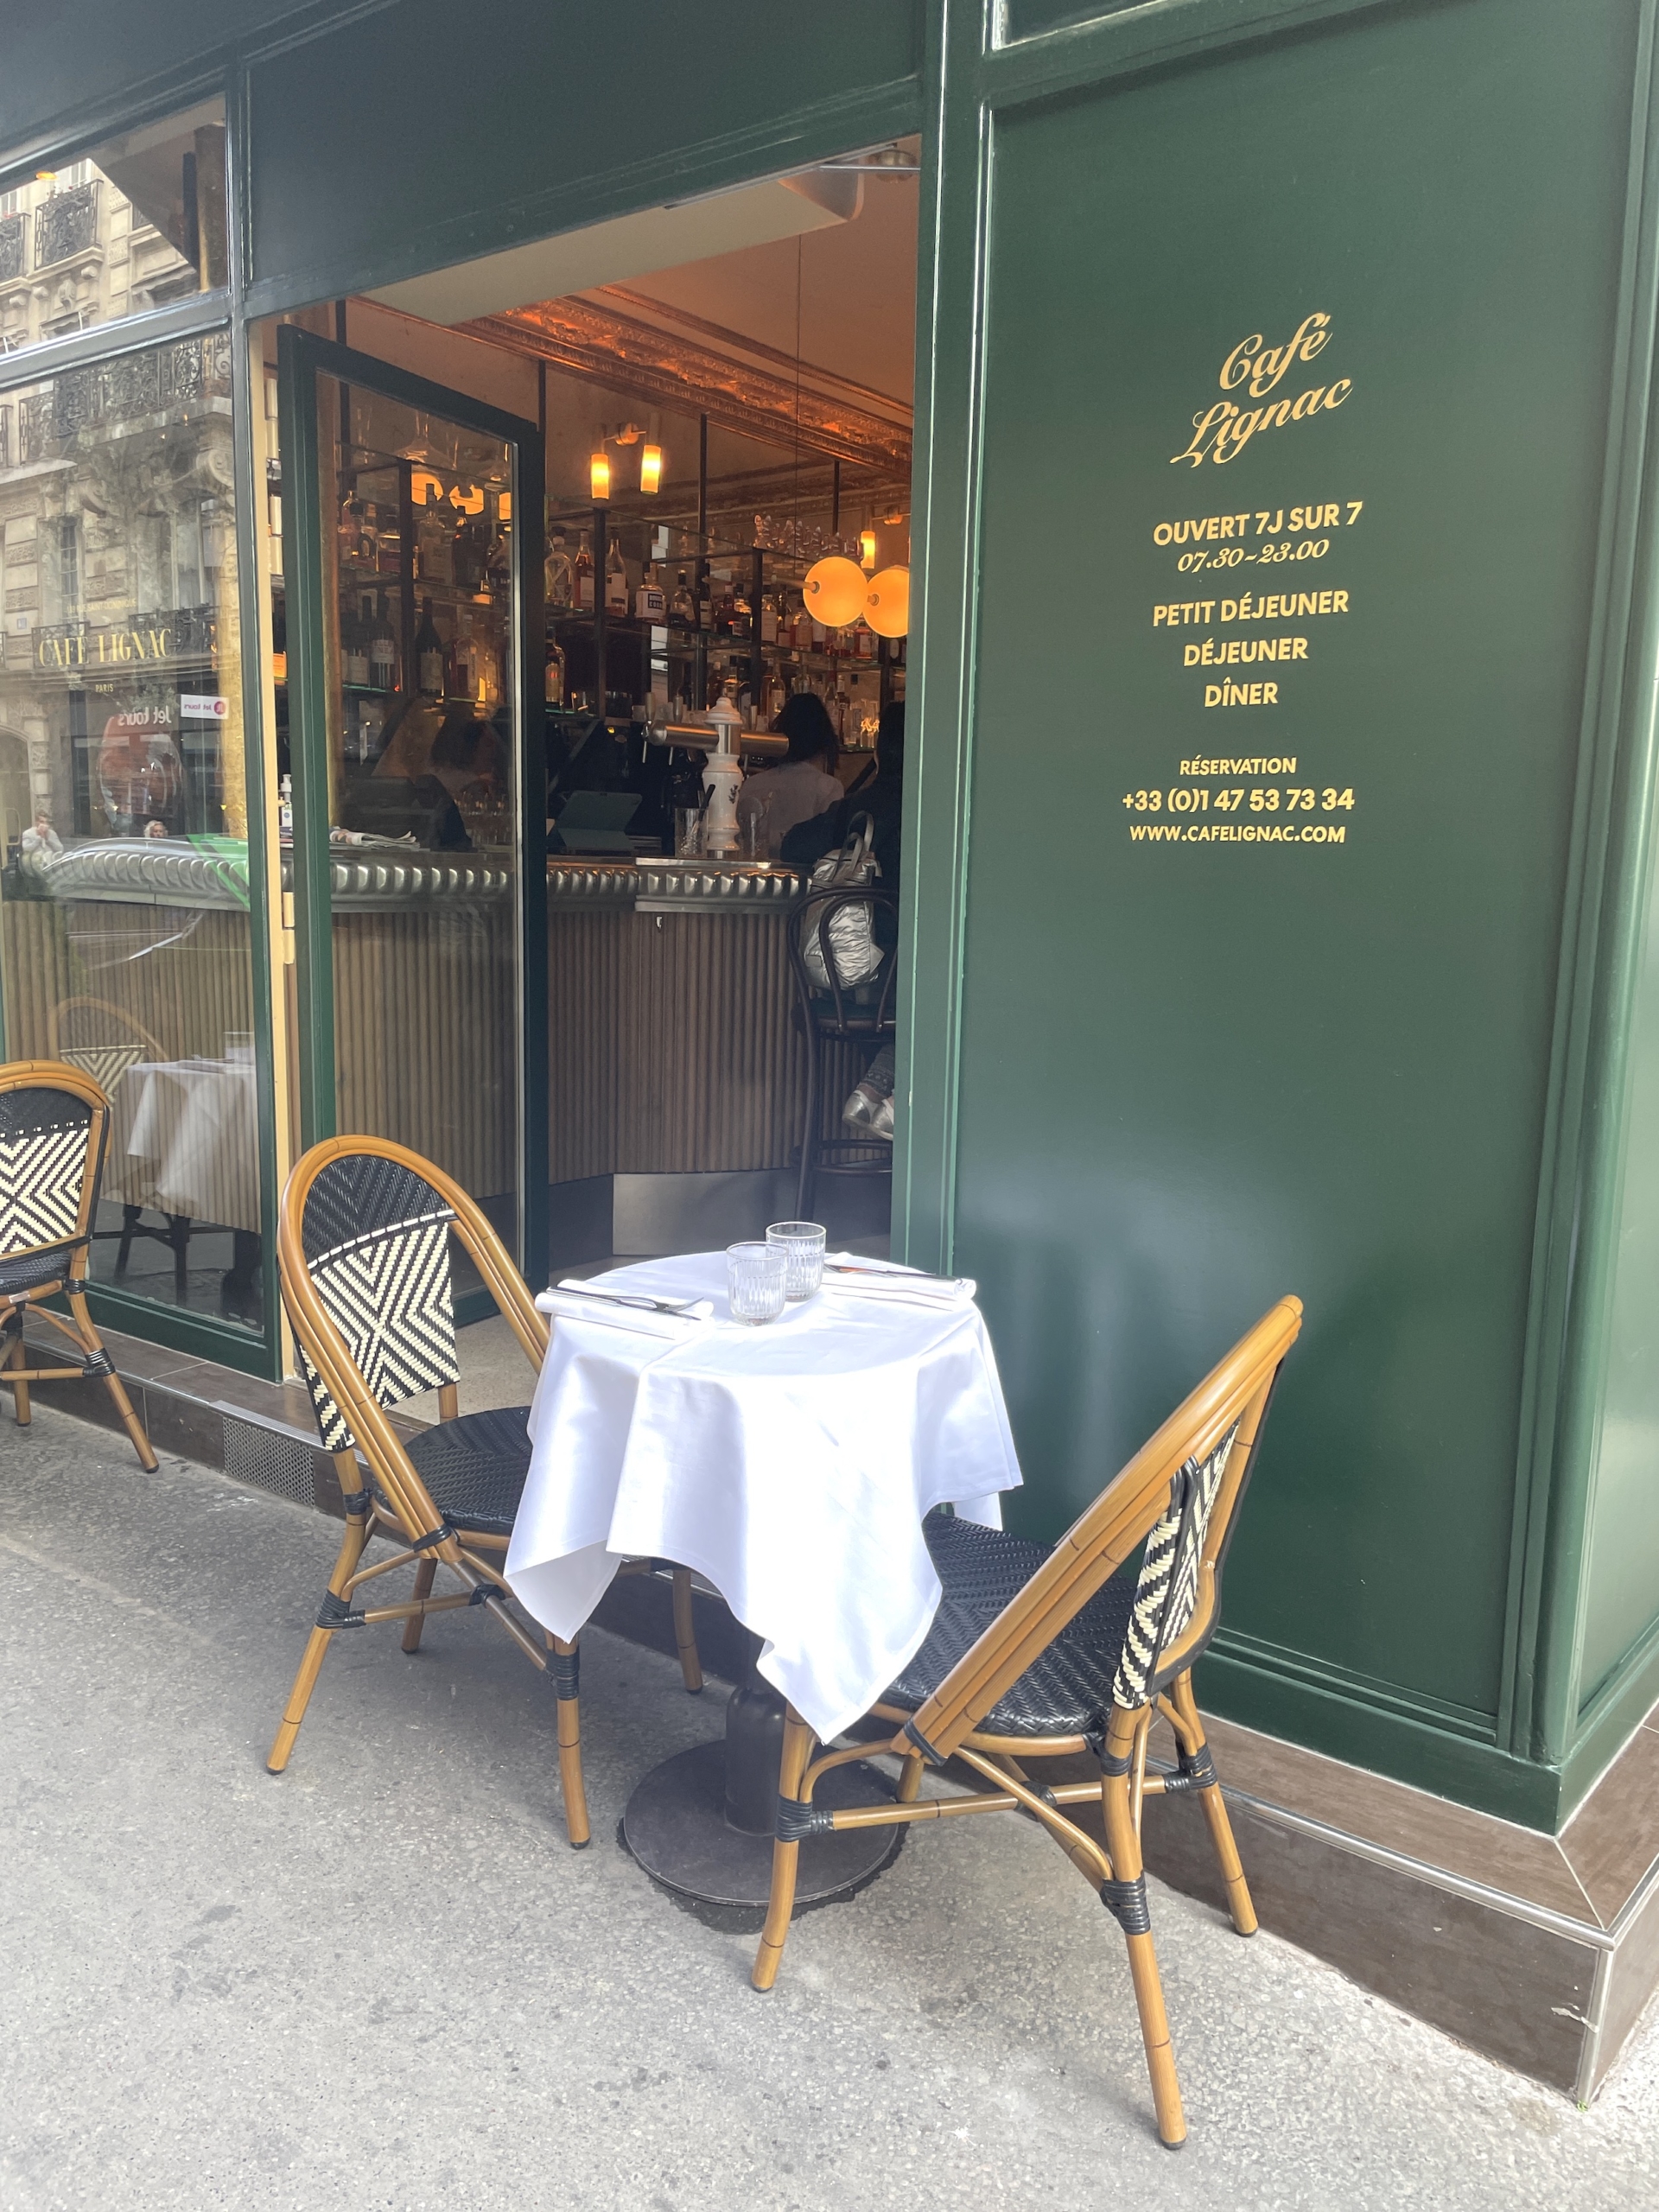 Dining at Paris’ new restaurant, Cafe Lignac in the 7th